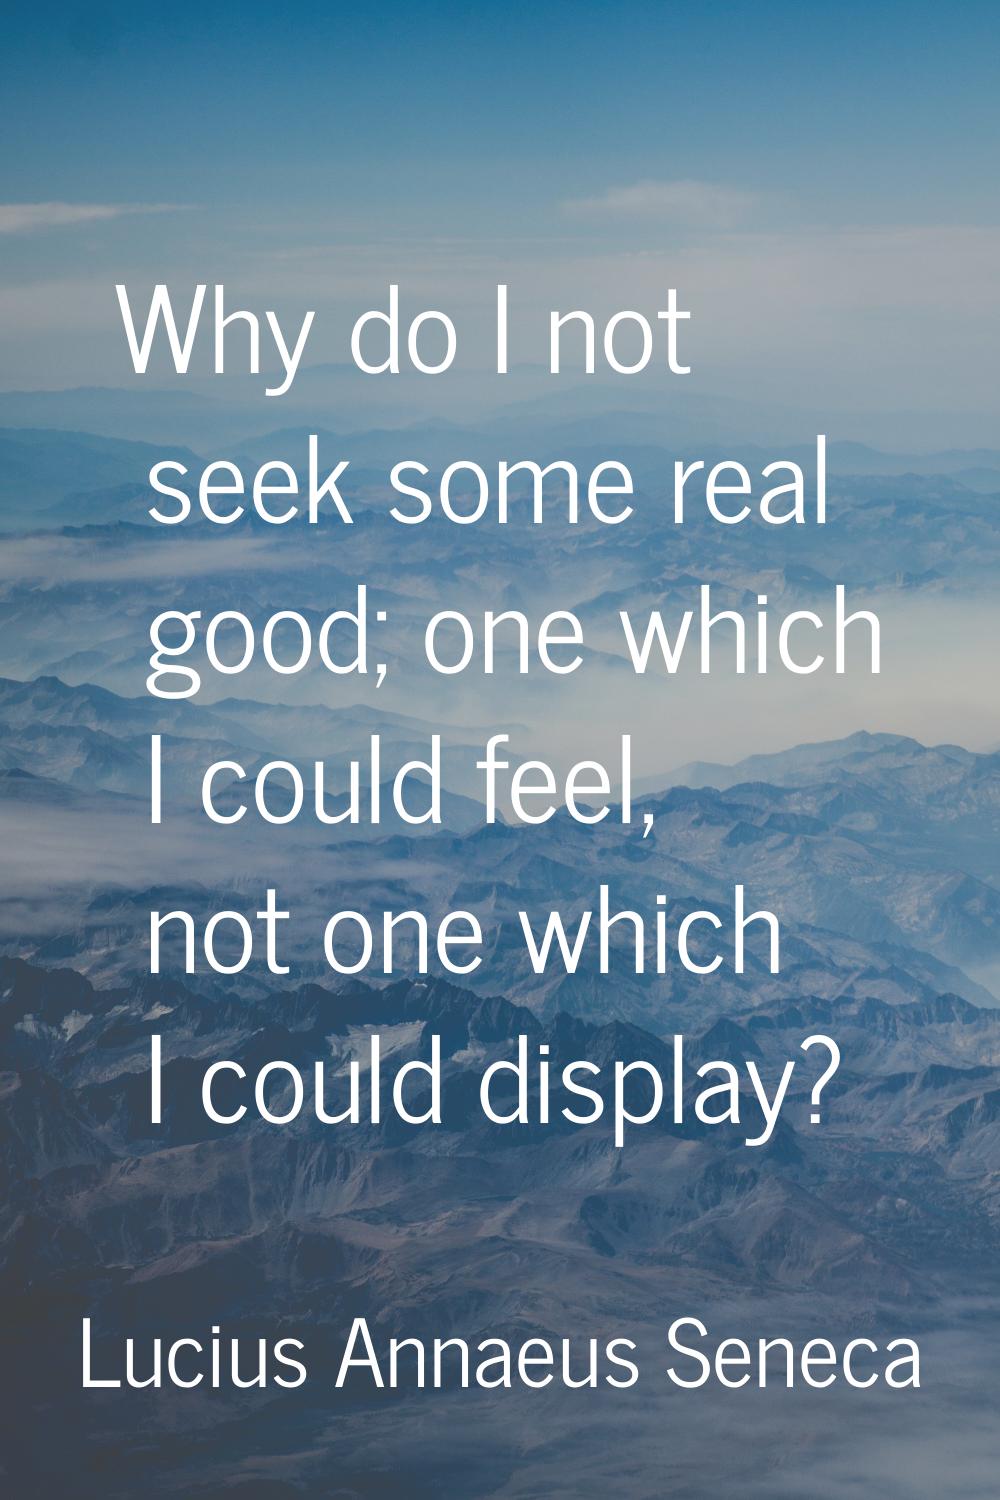 Why do I not seek some real good; one which I could feel, not one which I could display?